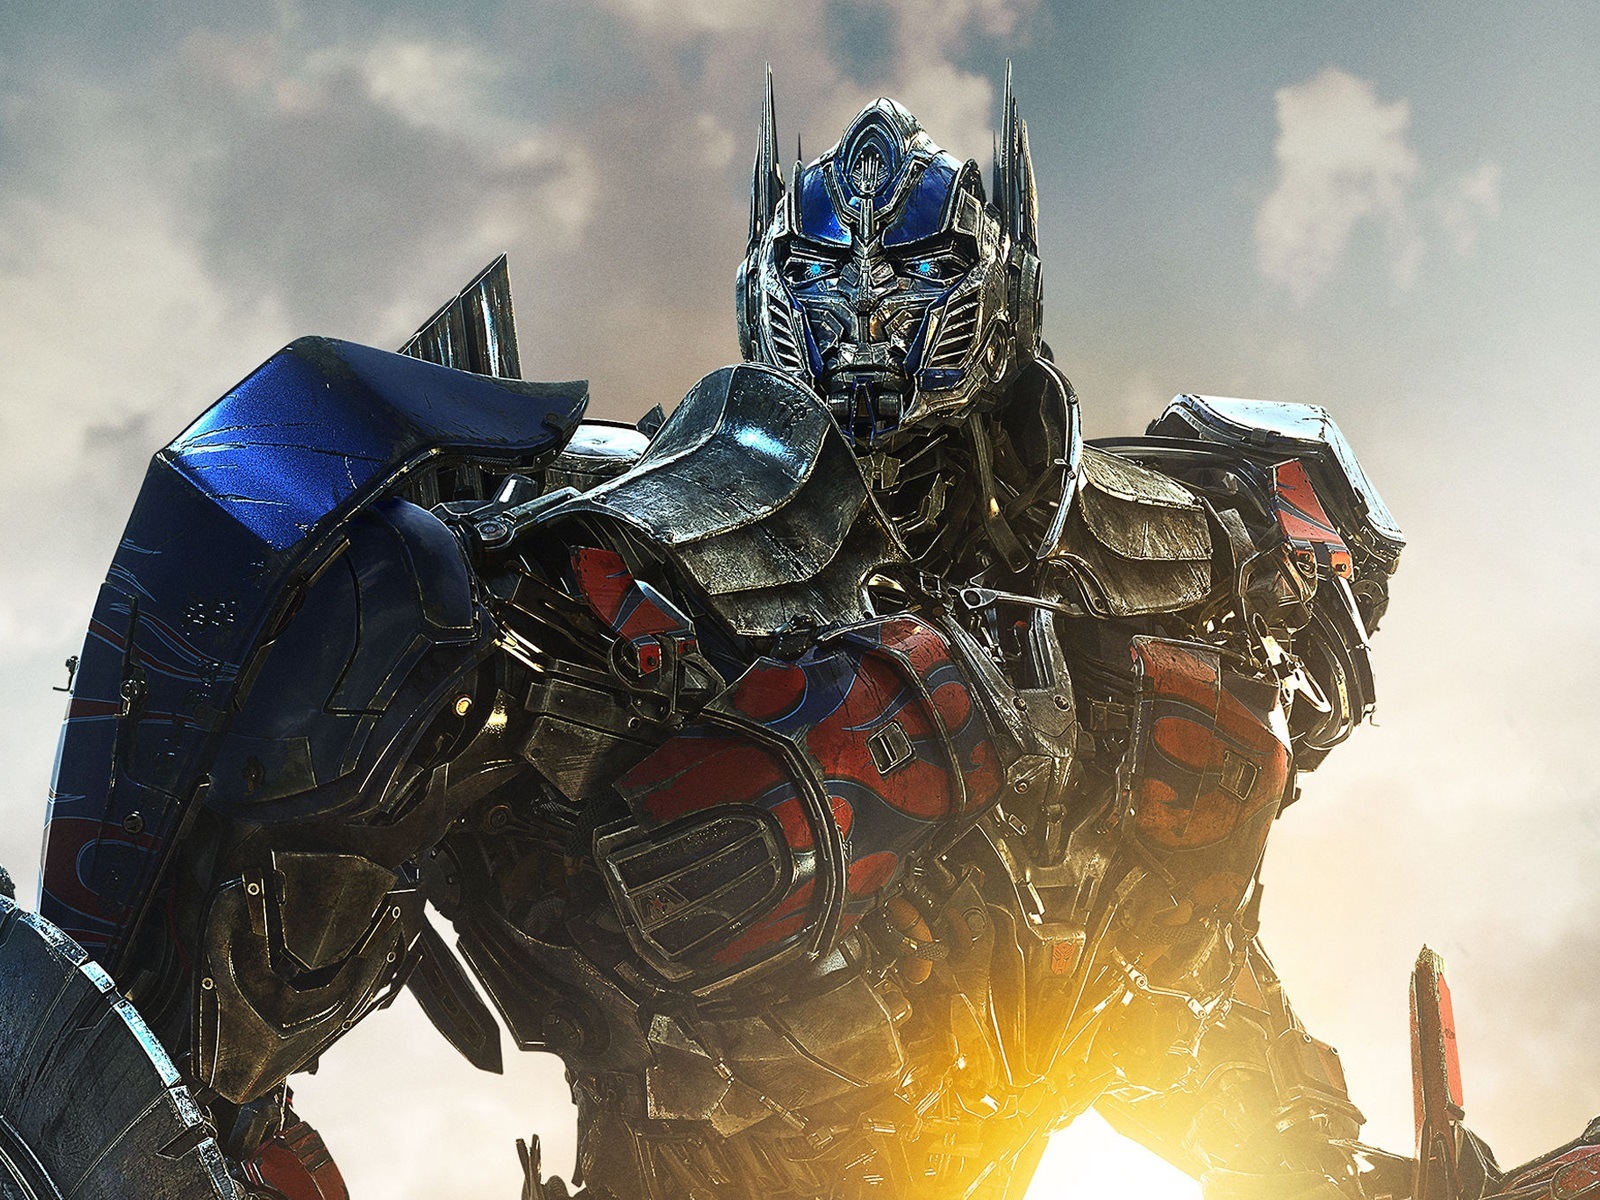 2014 Transformers: Age of Extinction HD tapety #2 - 1600x1200